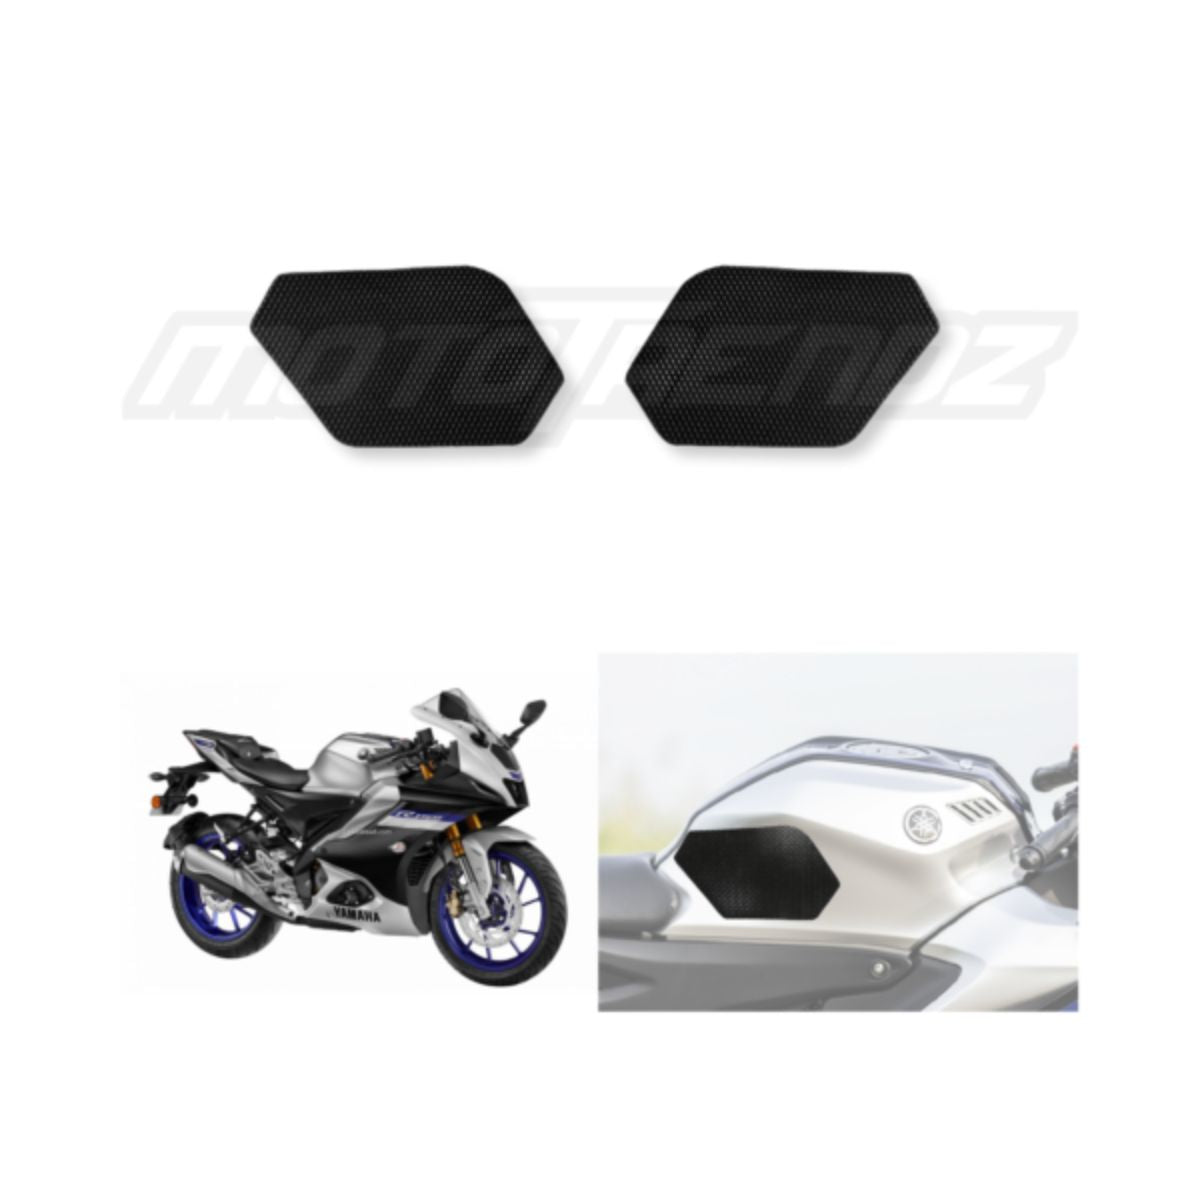 Traction Pads for Yamaha R15 V4/R15 M 3